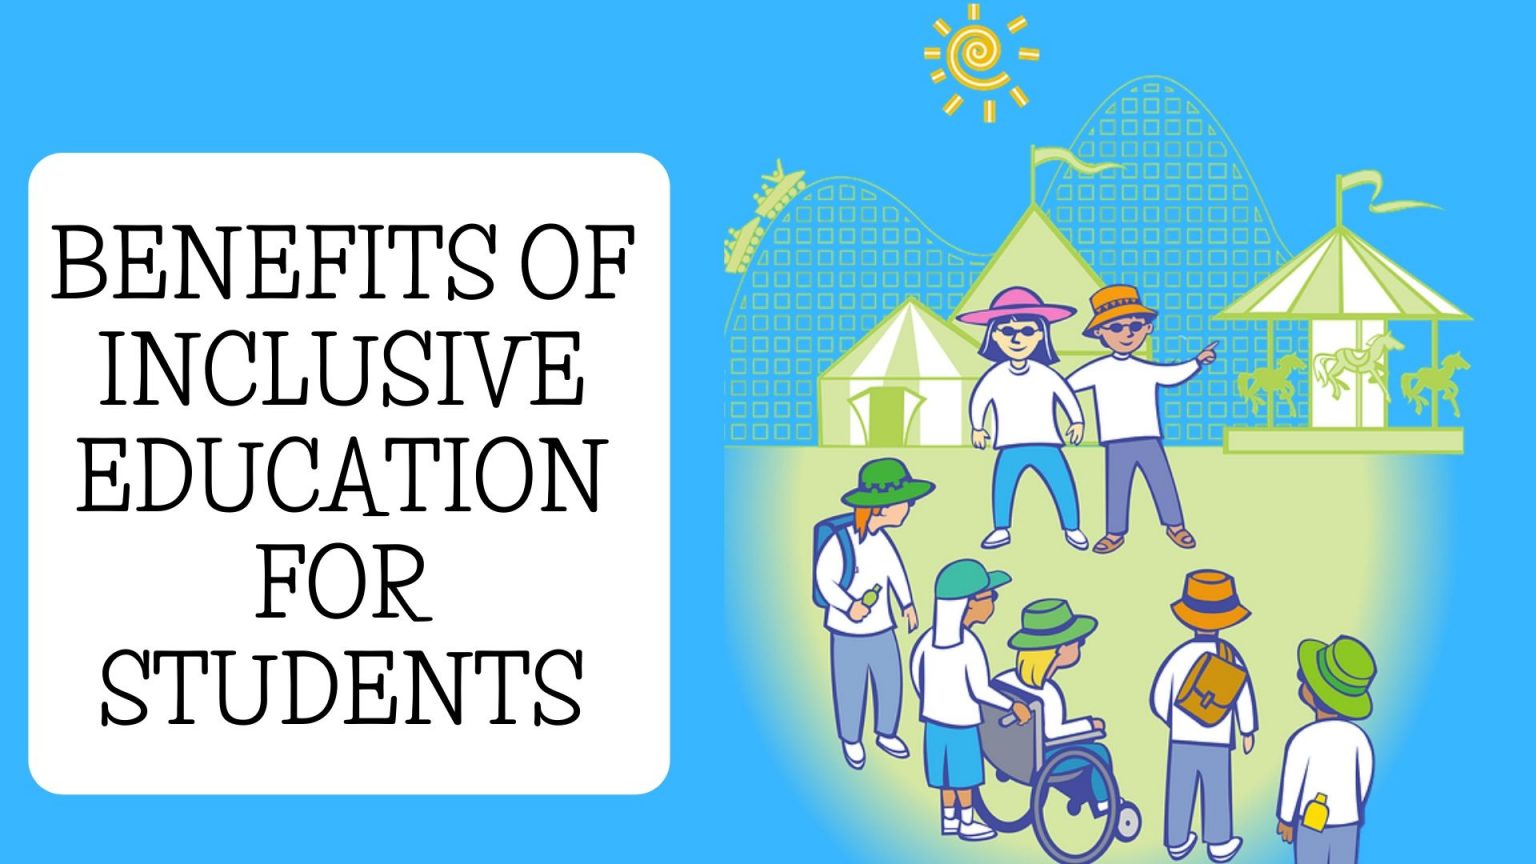 research about inclusive education